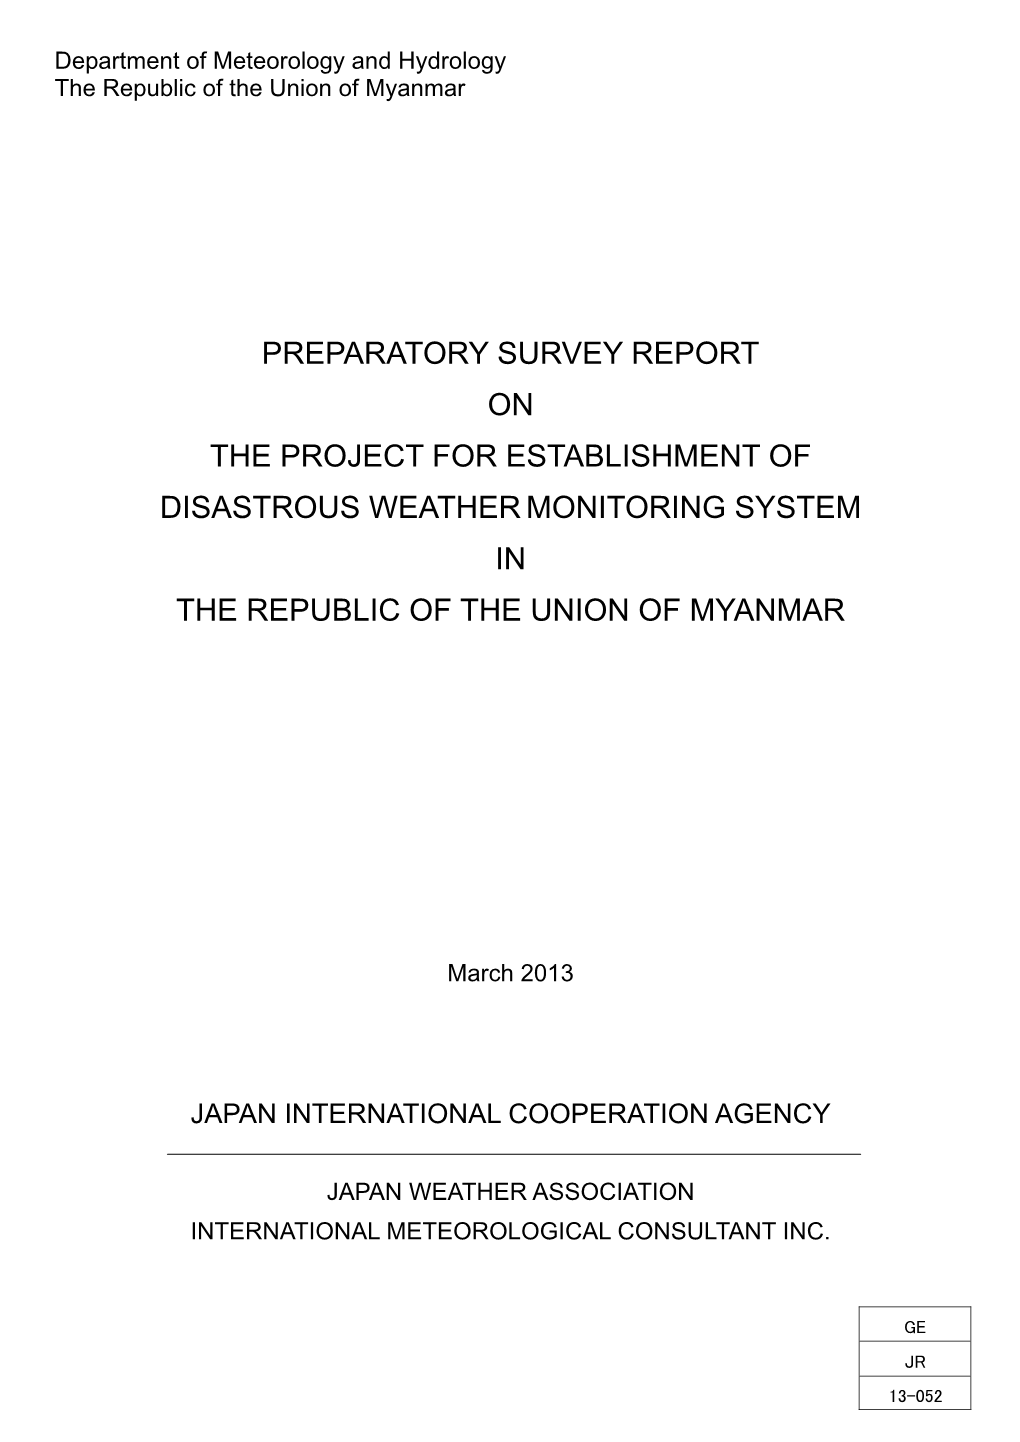 Preparatory Survey Report on the Project for Establishment Of